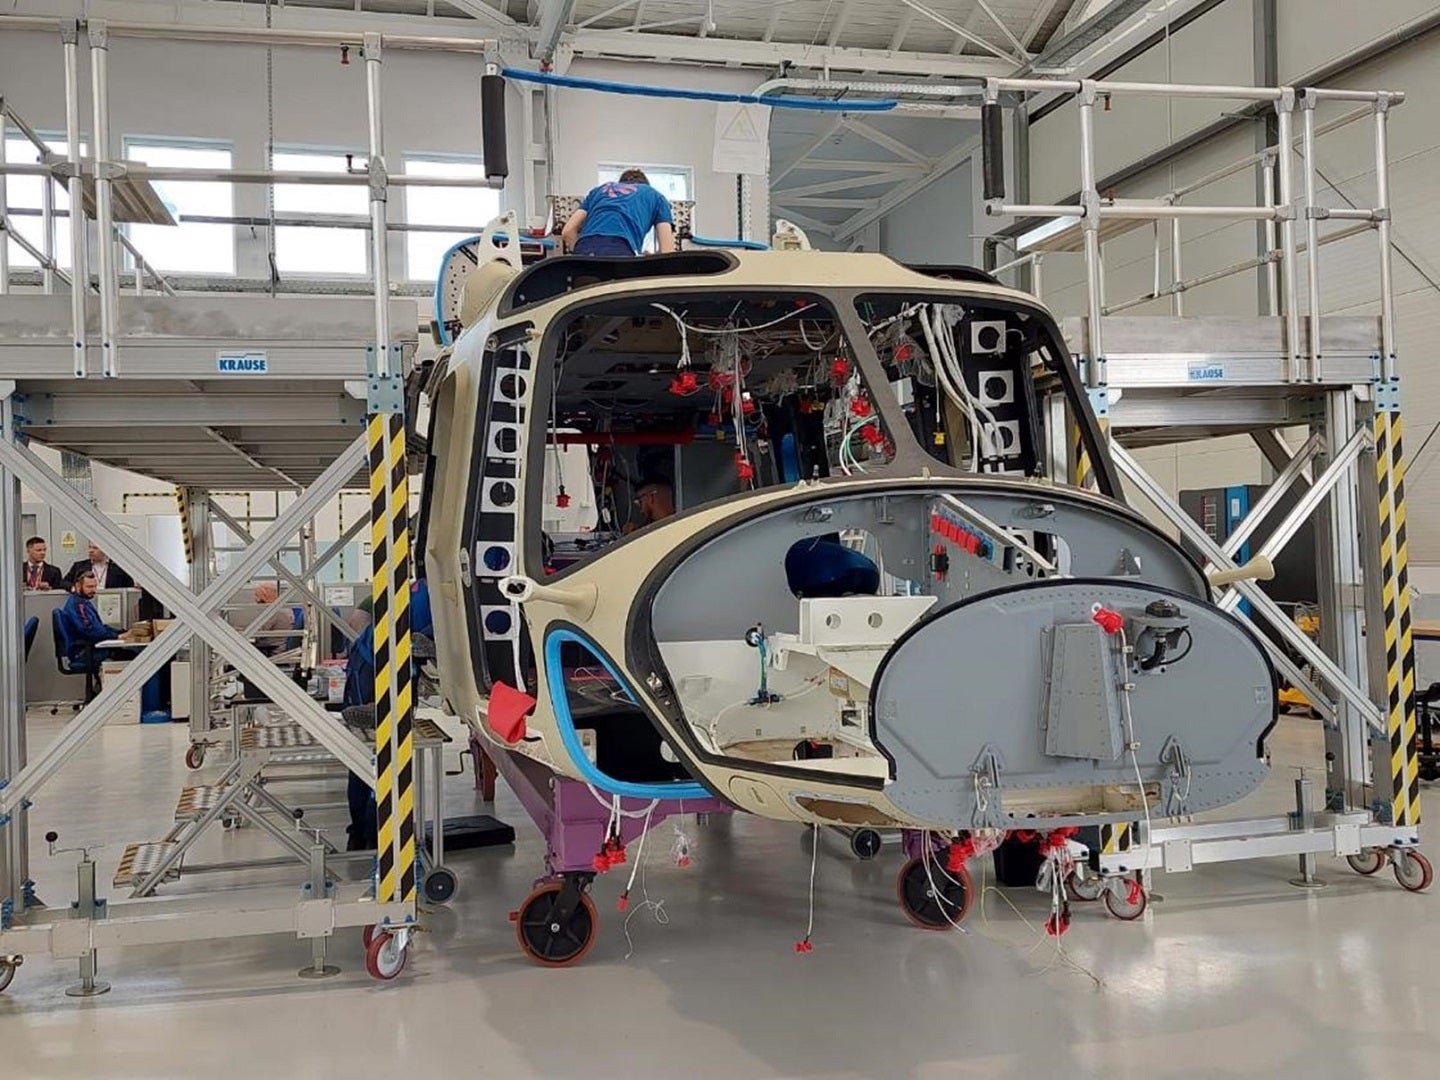 Leonardos AW149 helicopter production line takes flight in Poland